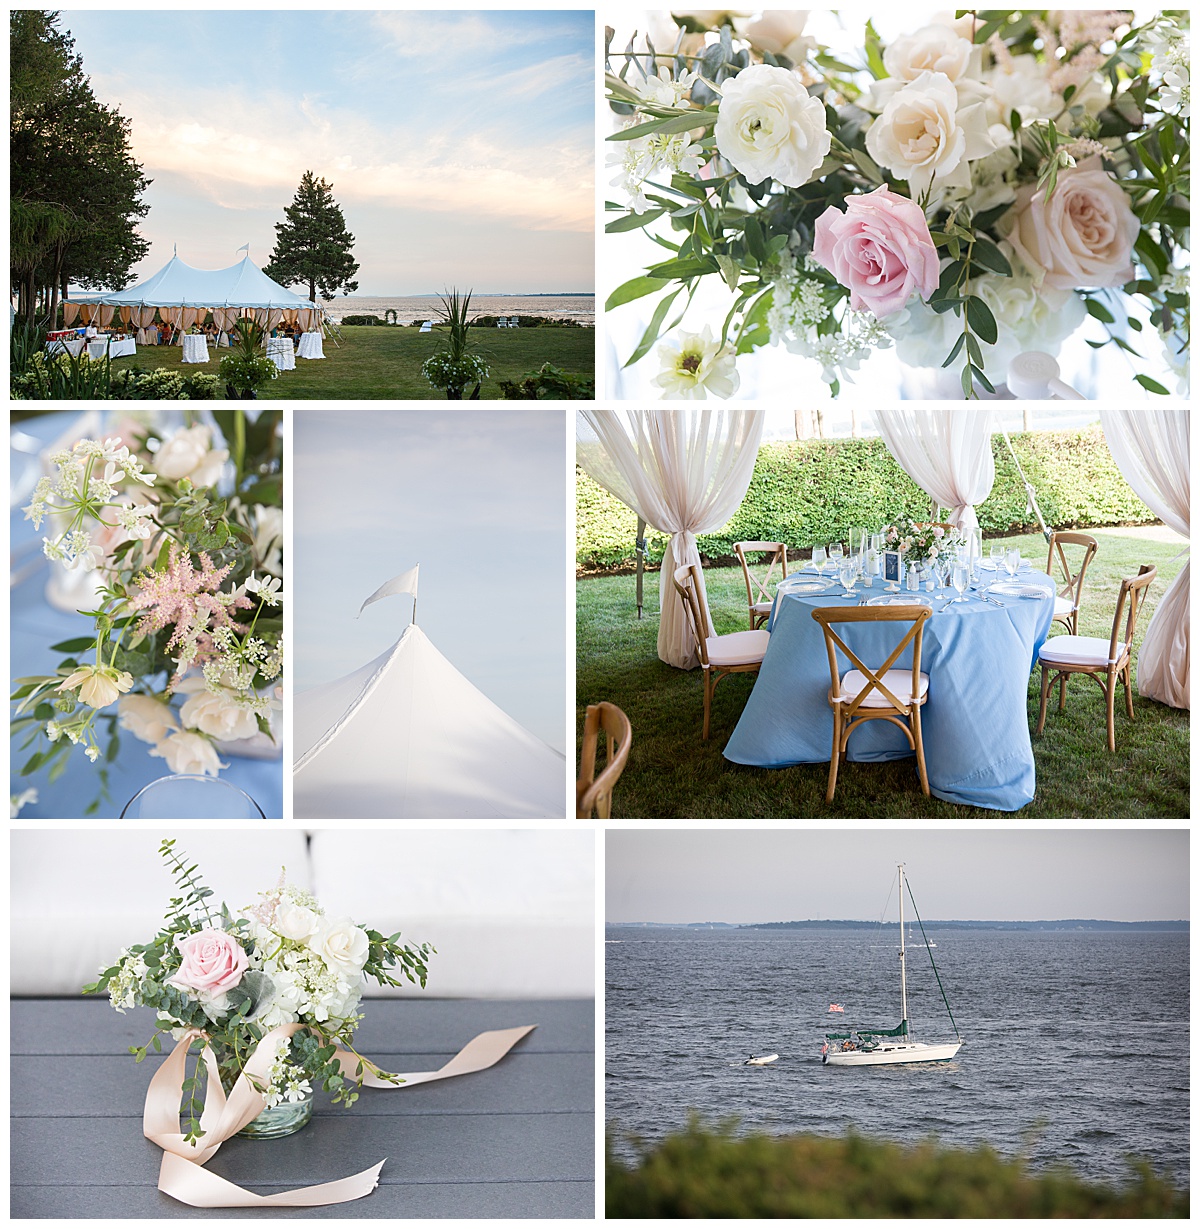 The Warwick RI Wedding featured elements of lush flowers, fine linens and luxury decor. 